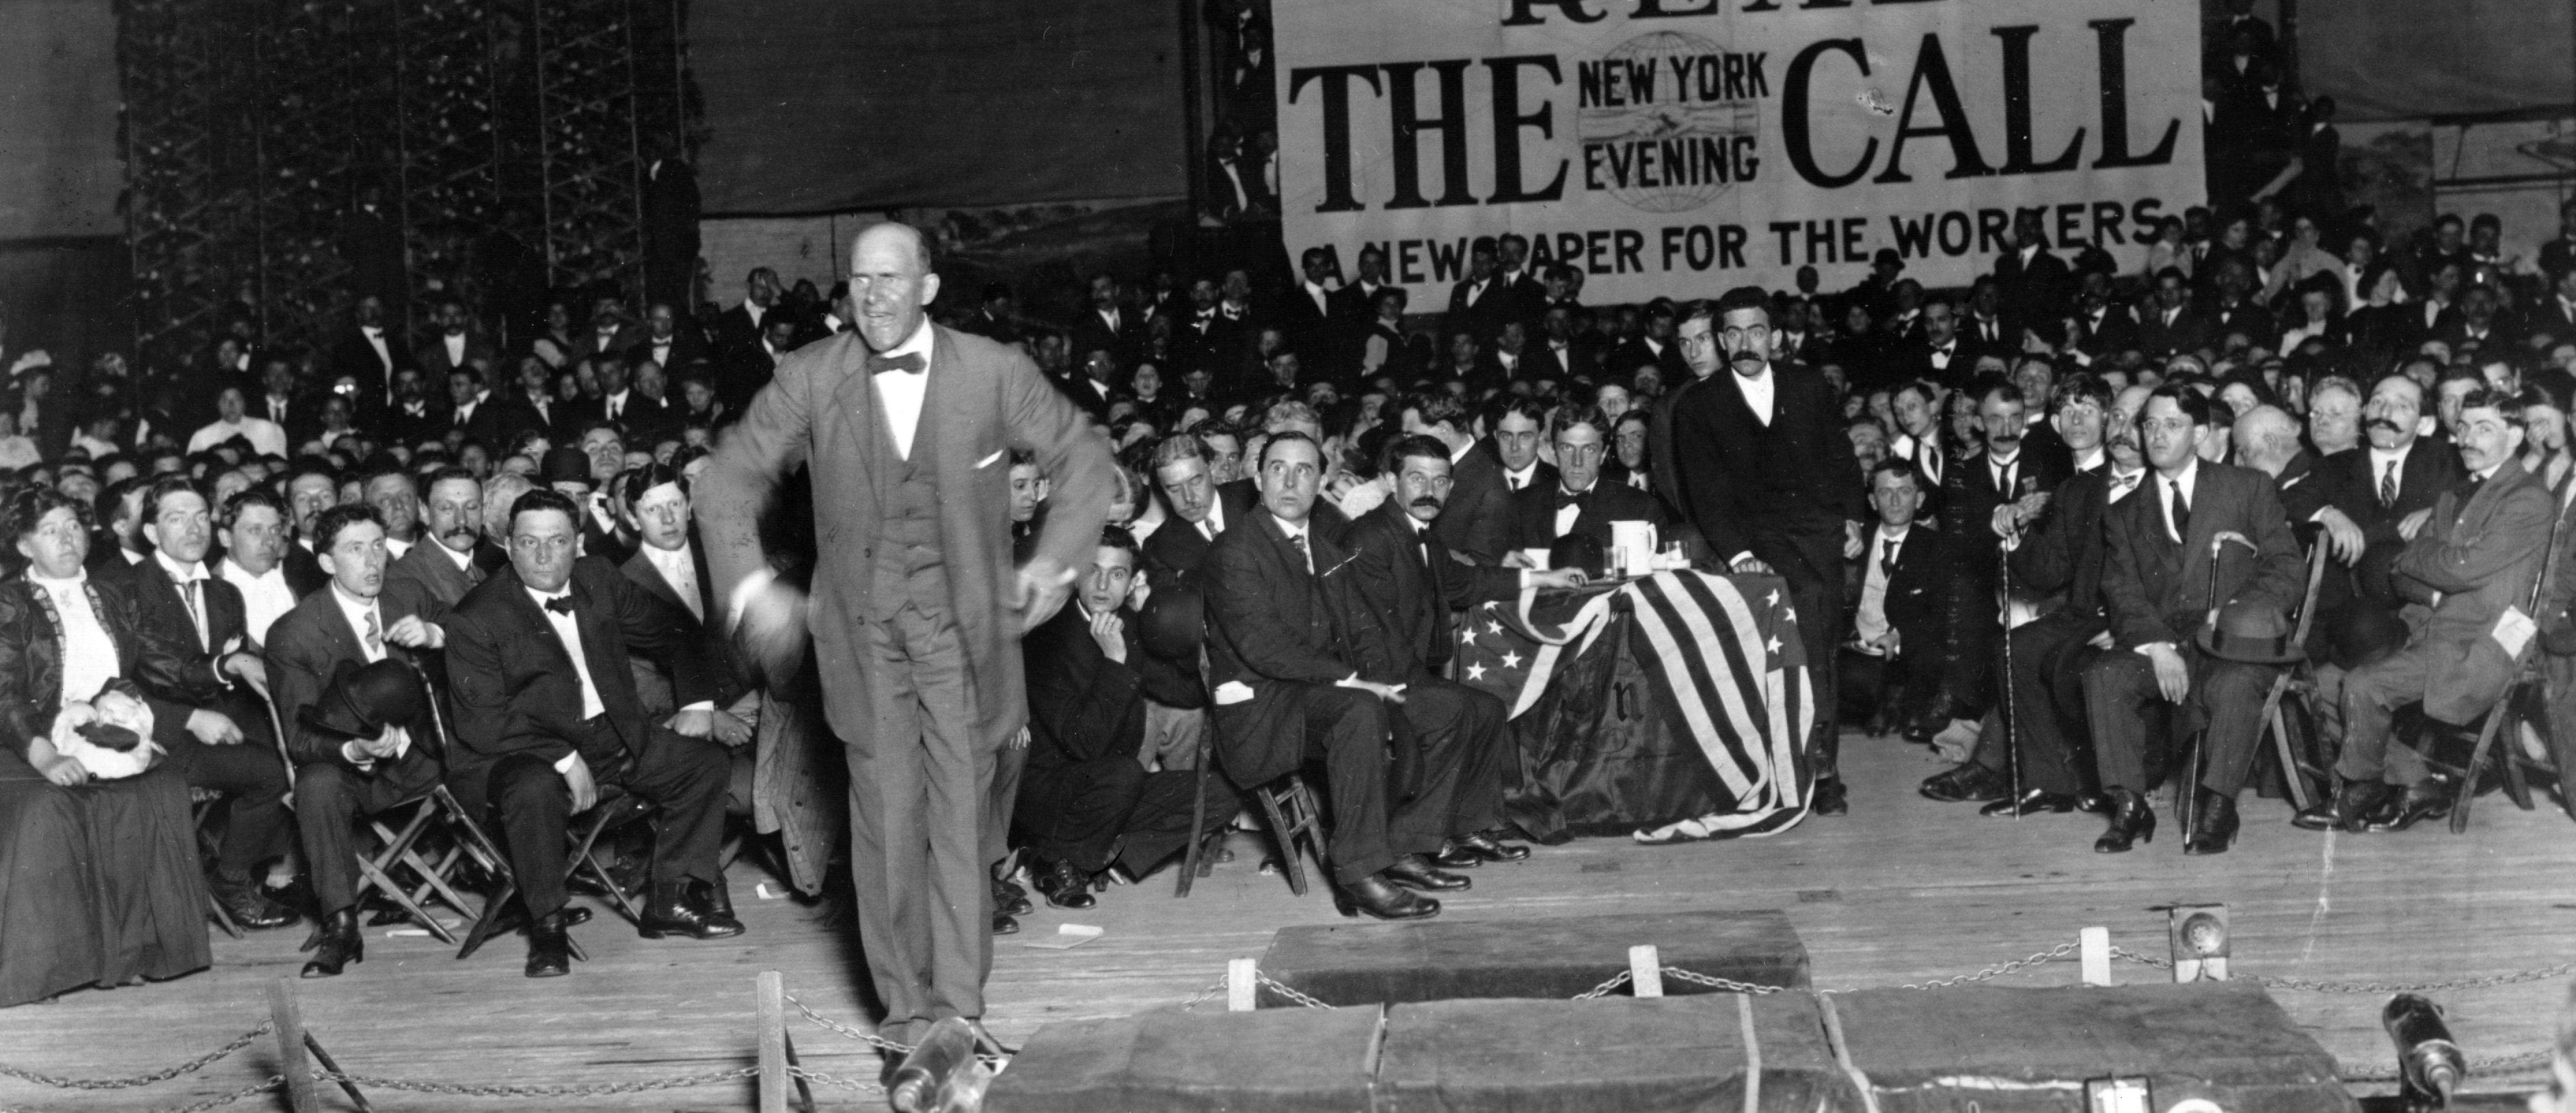 Eugene Debs and Canton, Ohio back in the spotlight because of Donald Trump's conviction